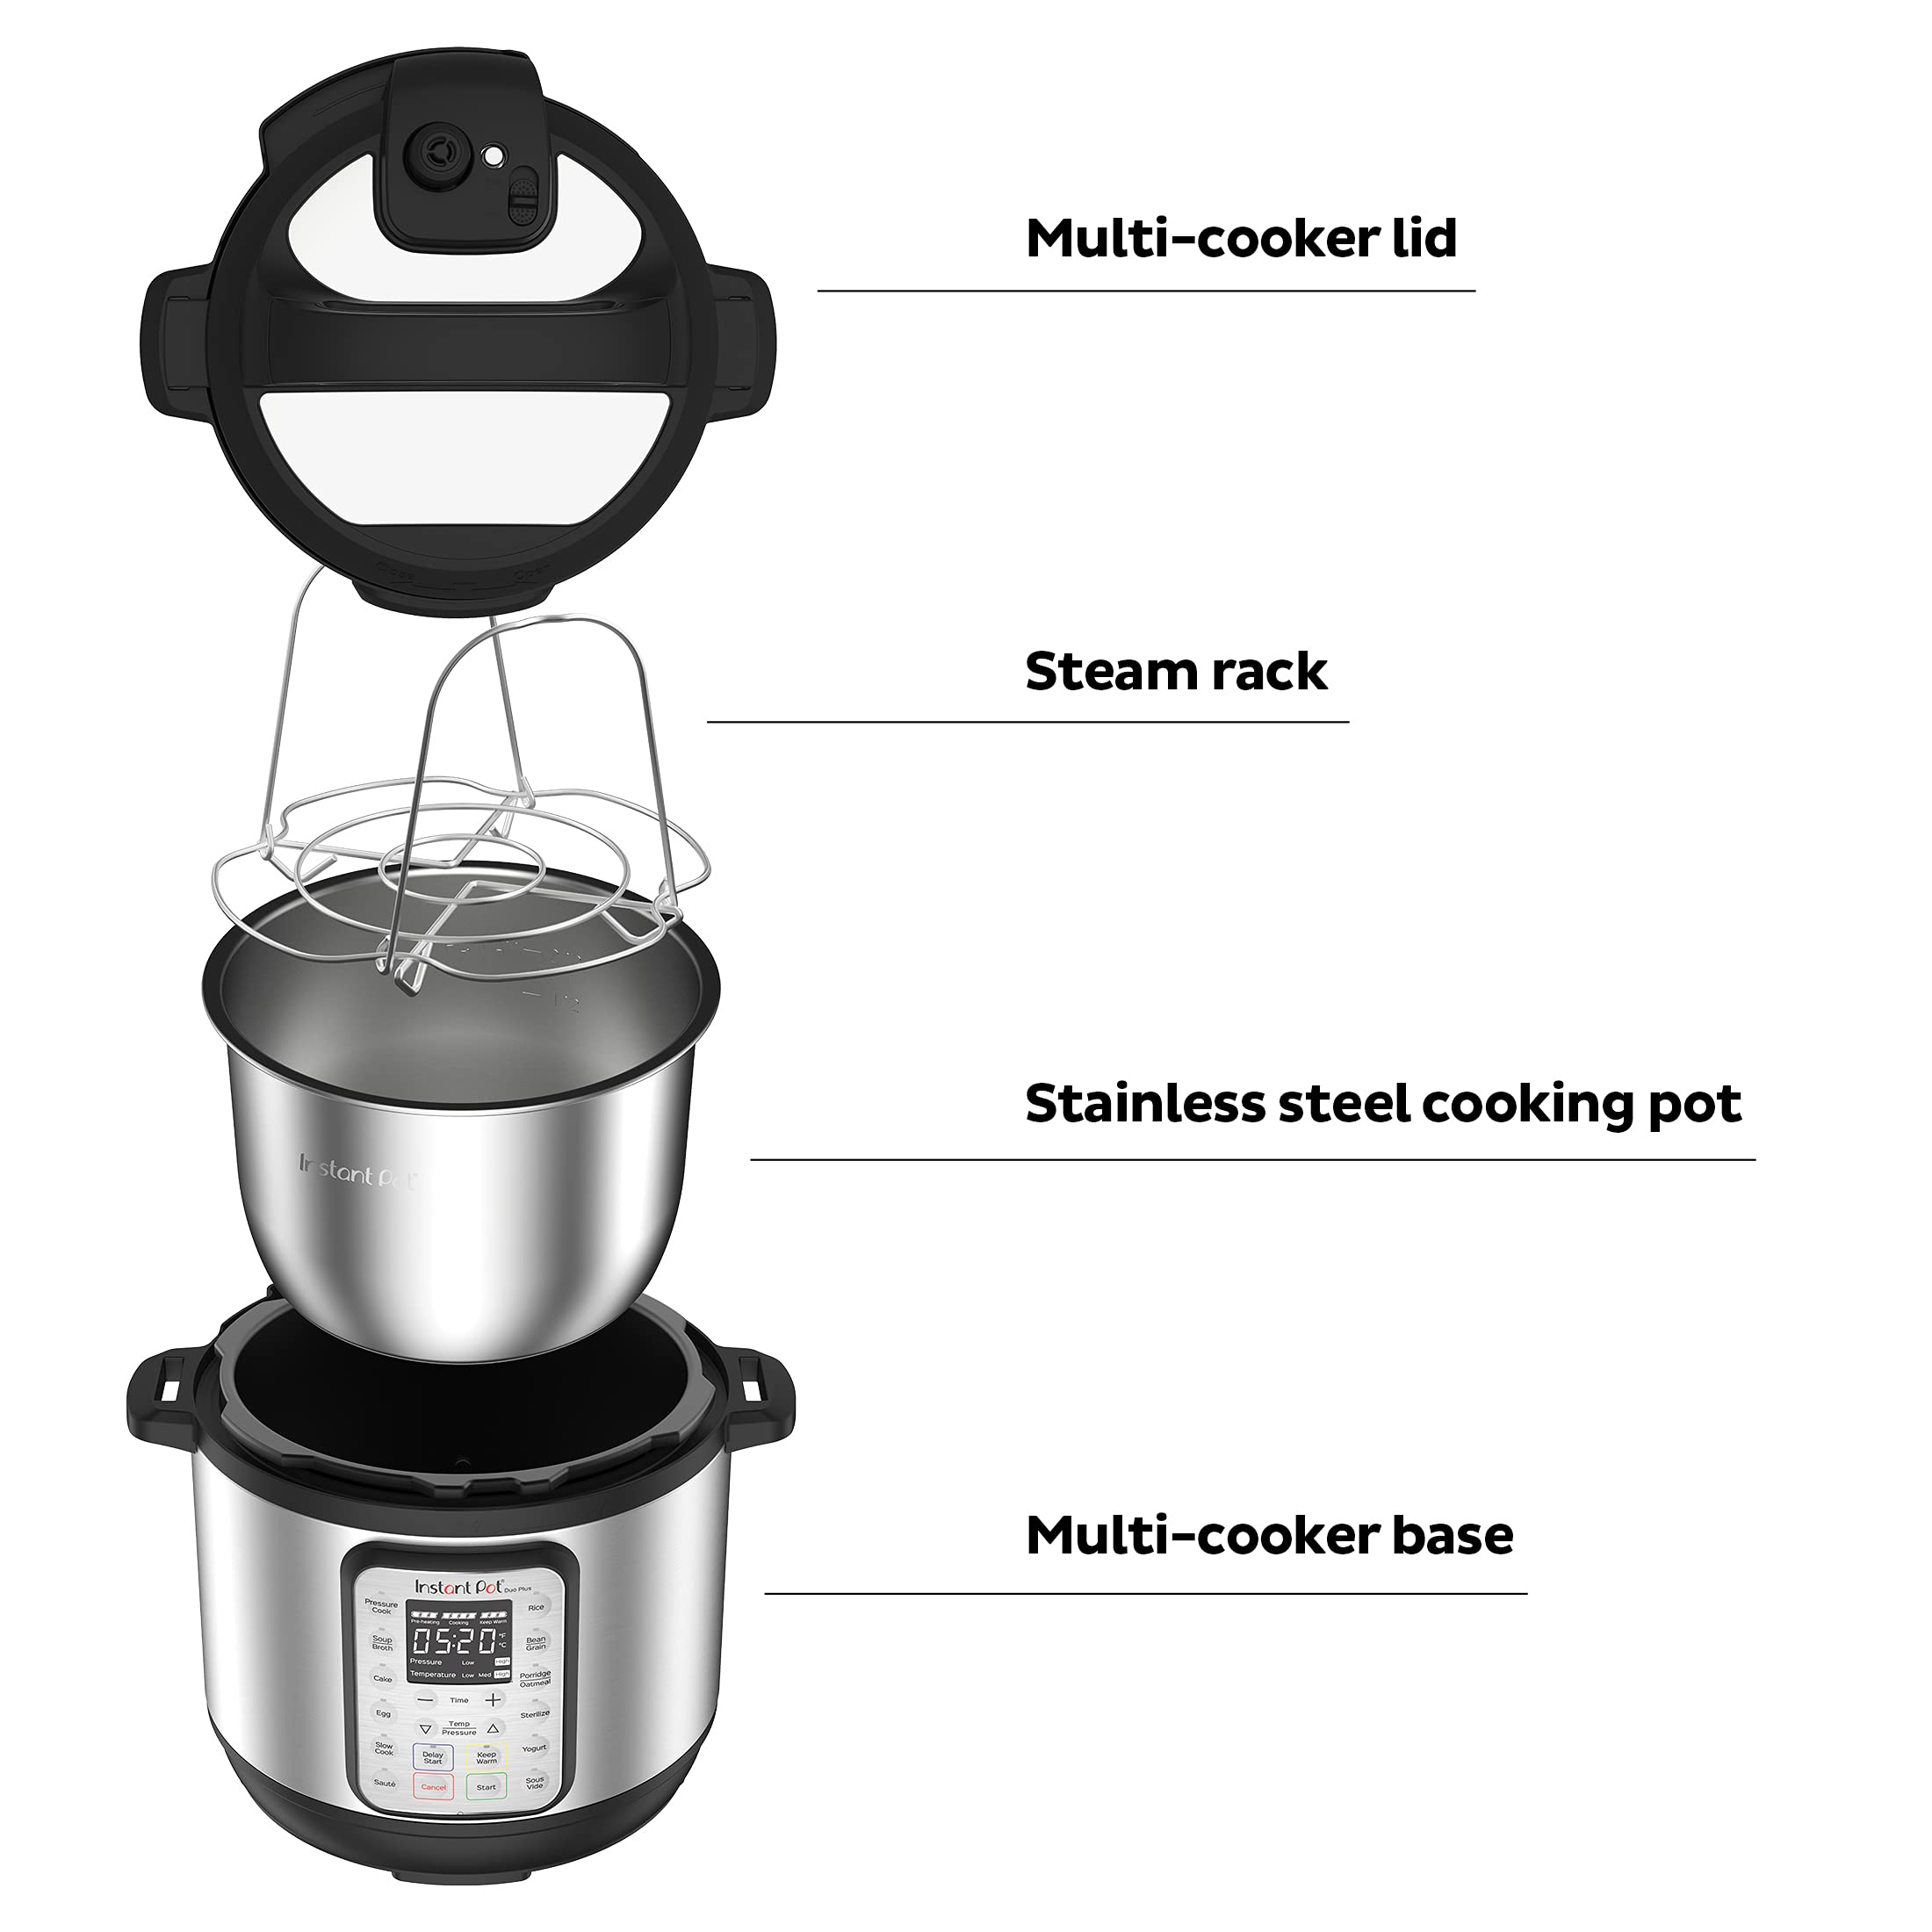 Instant Pot Duo Plus 9-in-1 Electric Pressure Cooker, Slow Cooker, Rice Cooker, Steamer, Sauté, Yogurt Maker, Warmer & Sterilizer, Includes App With Over 800 Recipes, Stainless Steel, 8 Quart